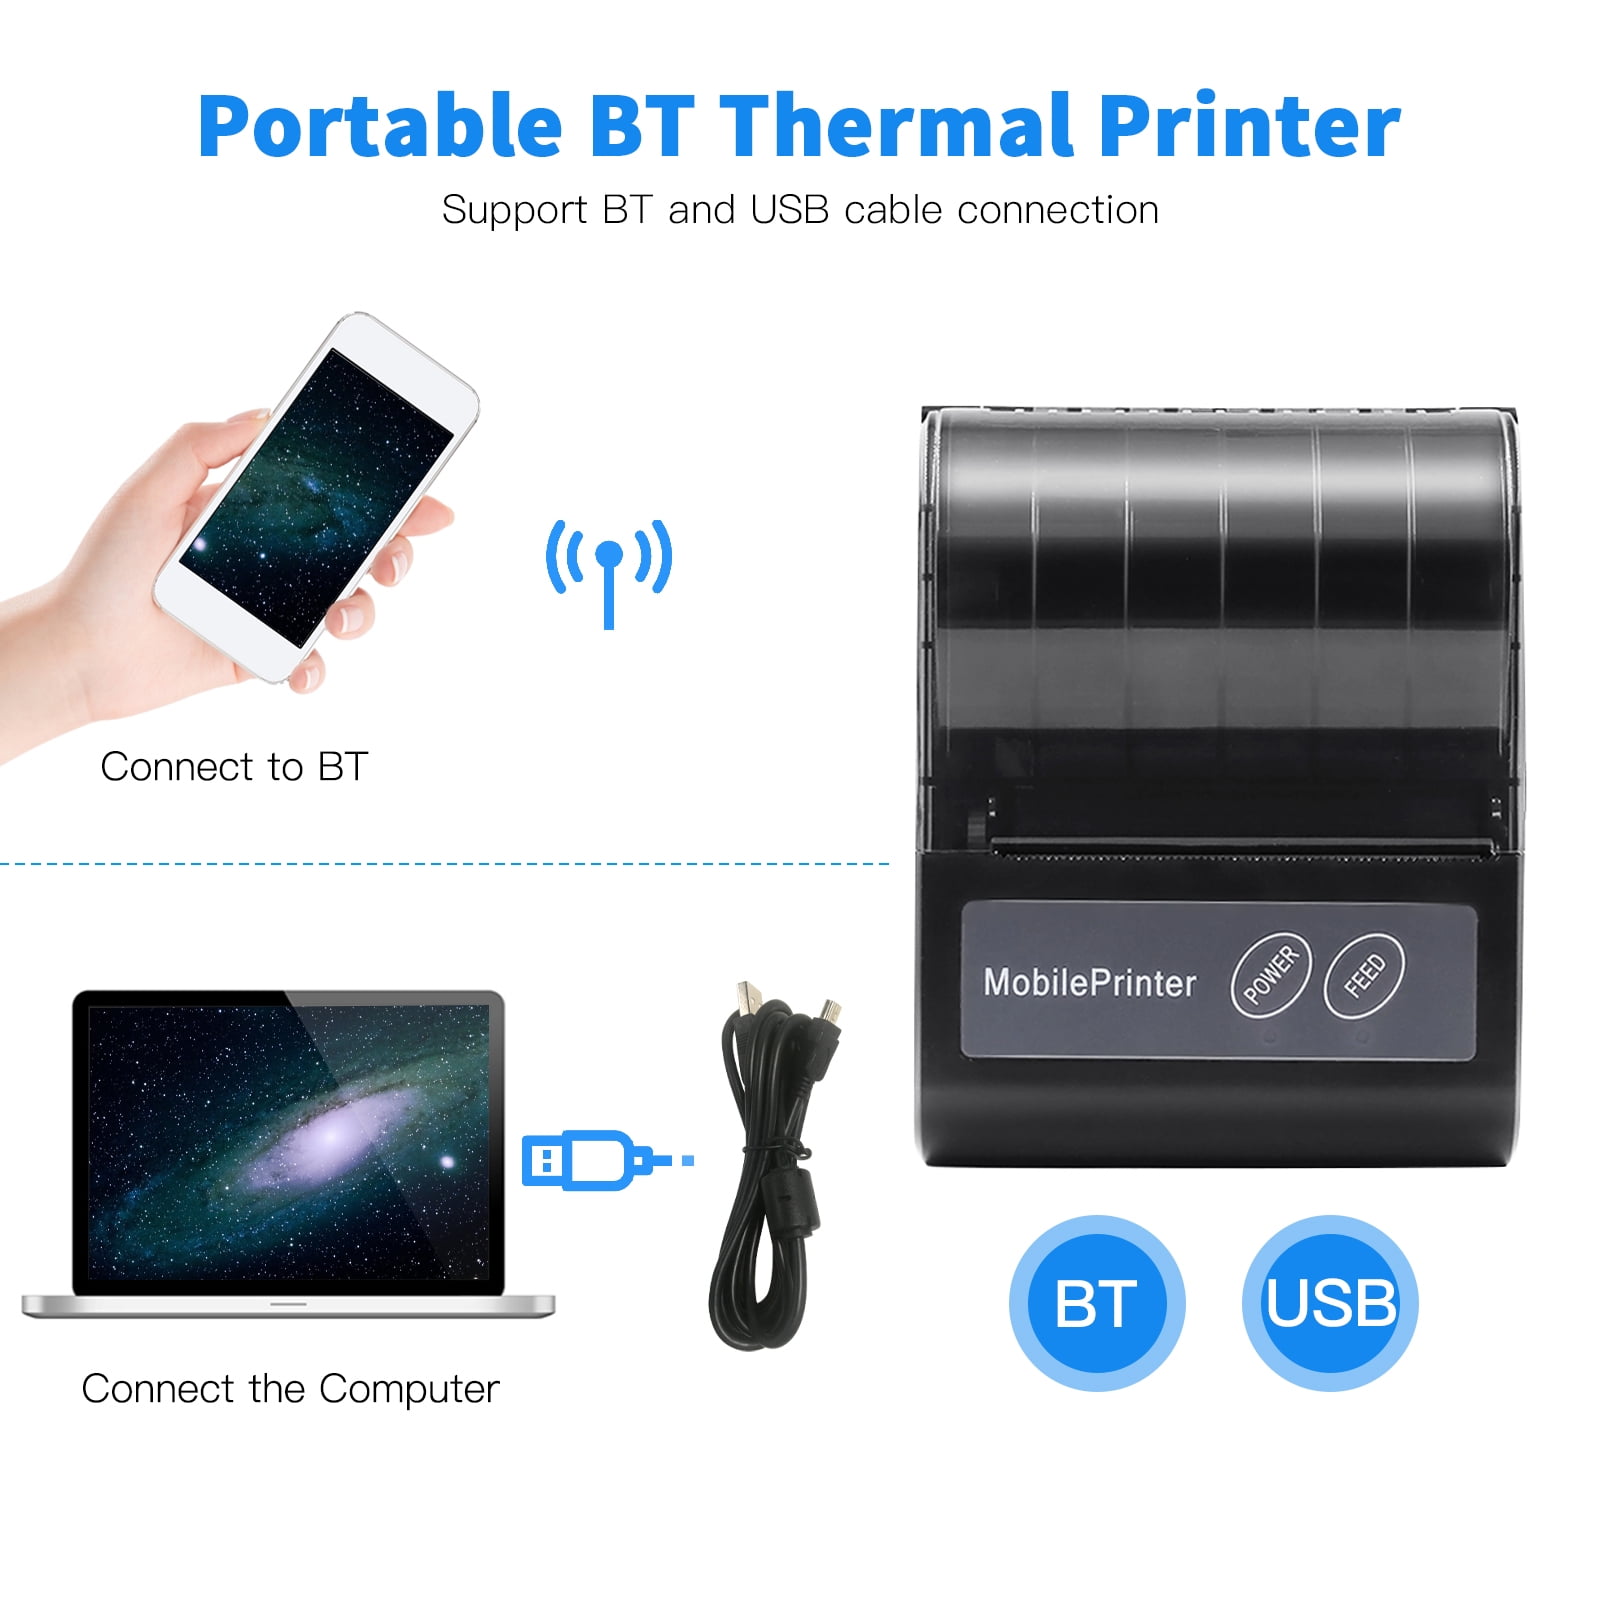 DC5V USB 3 80mm Mini Thermal Receipt Printer Bluetooth-Compatible Portable  Printer Support PC Android IOS Printer Paper Papeles